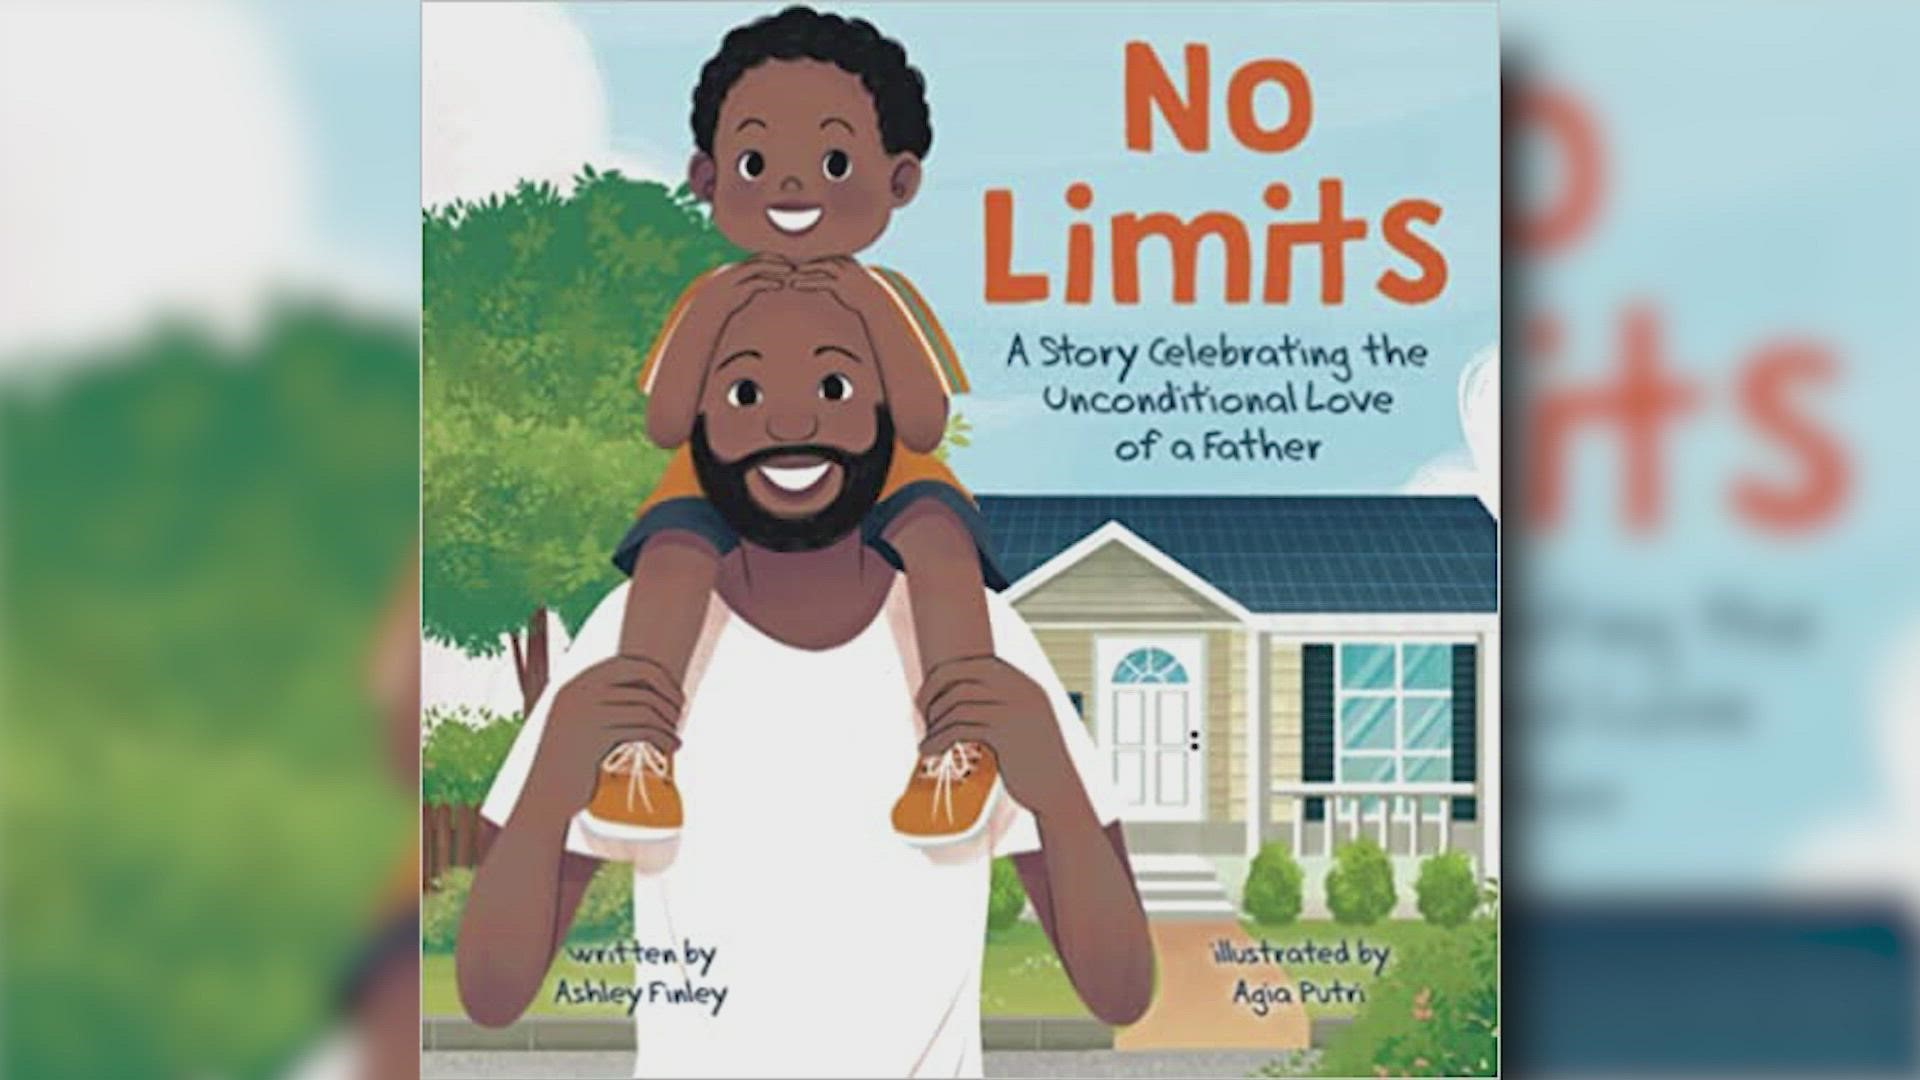 The book, by Ashley Finley, celebrates father figures in our lives.